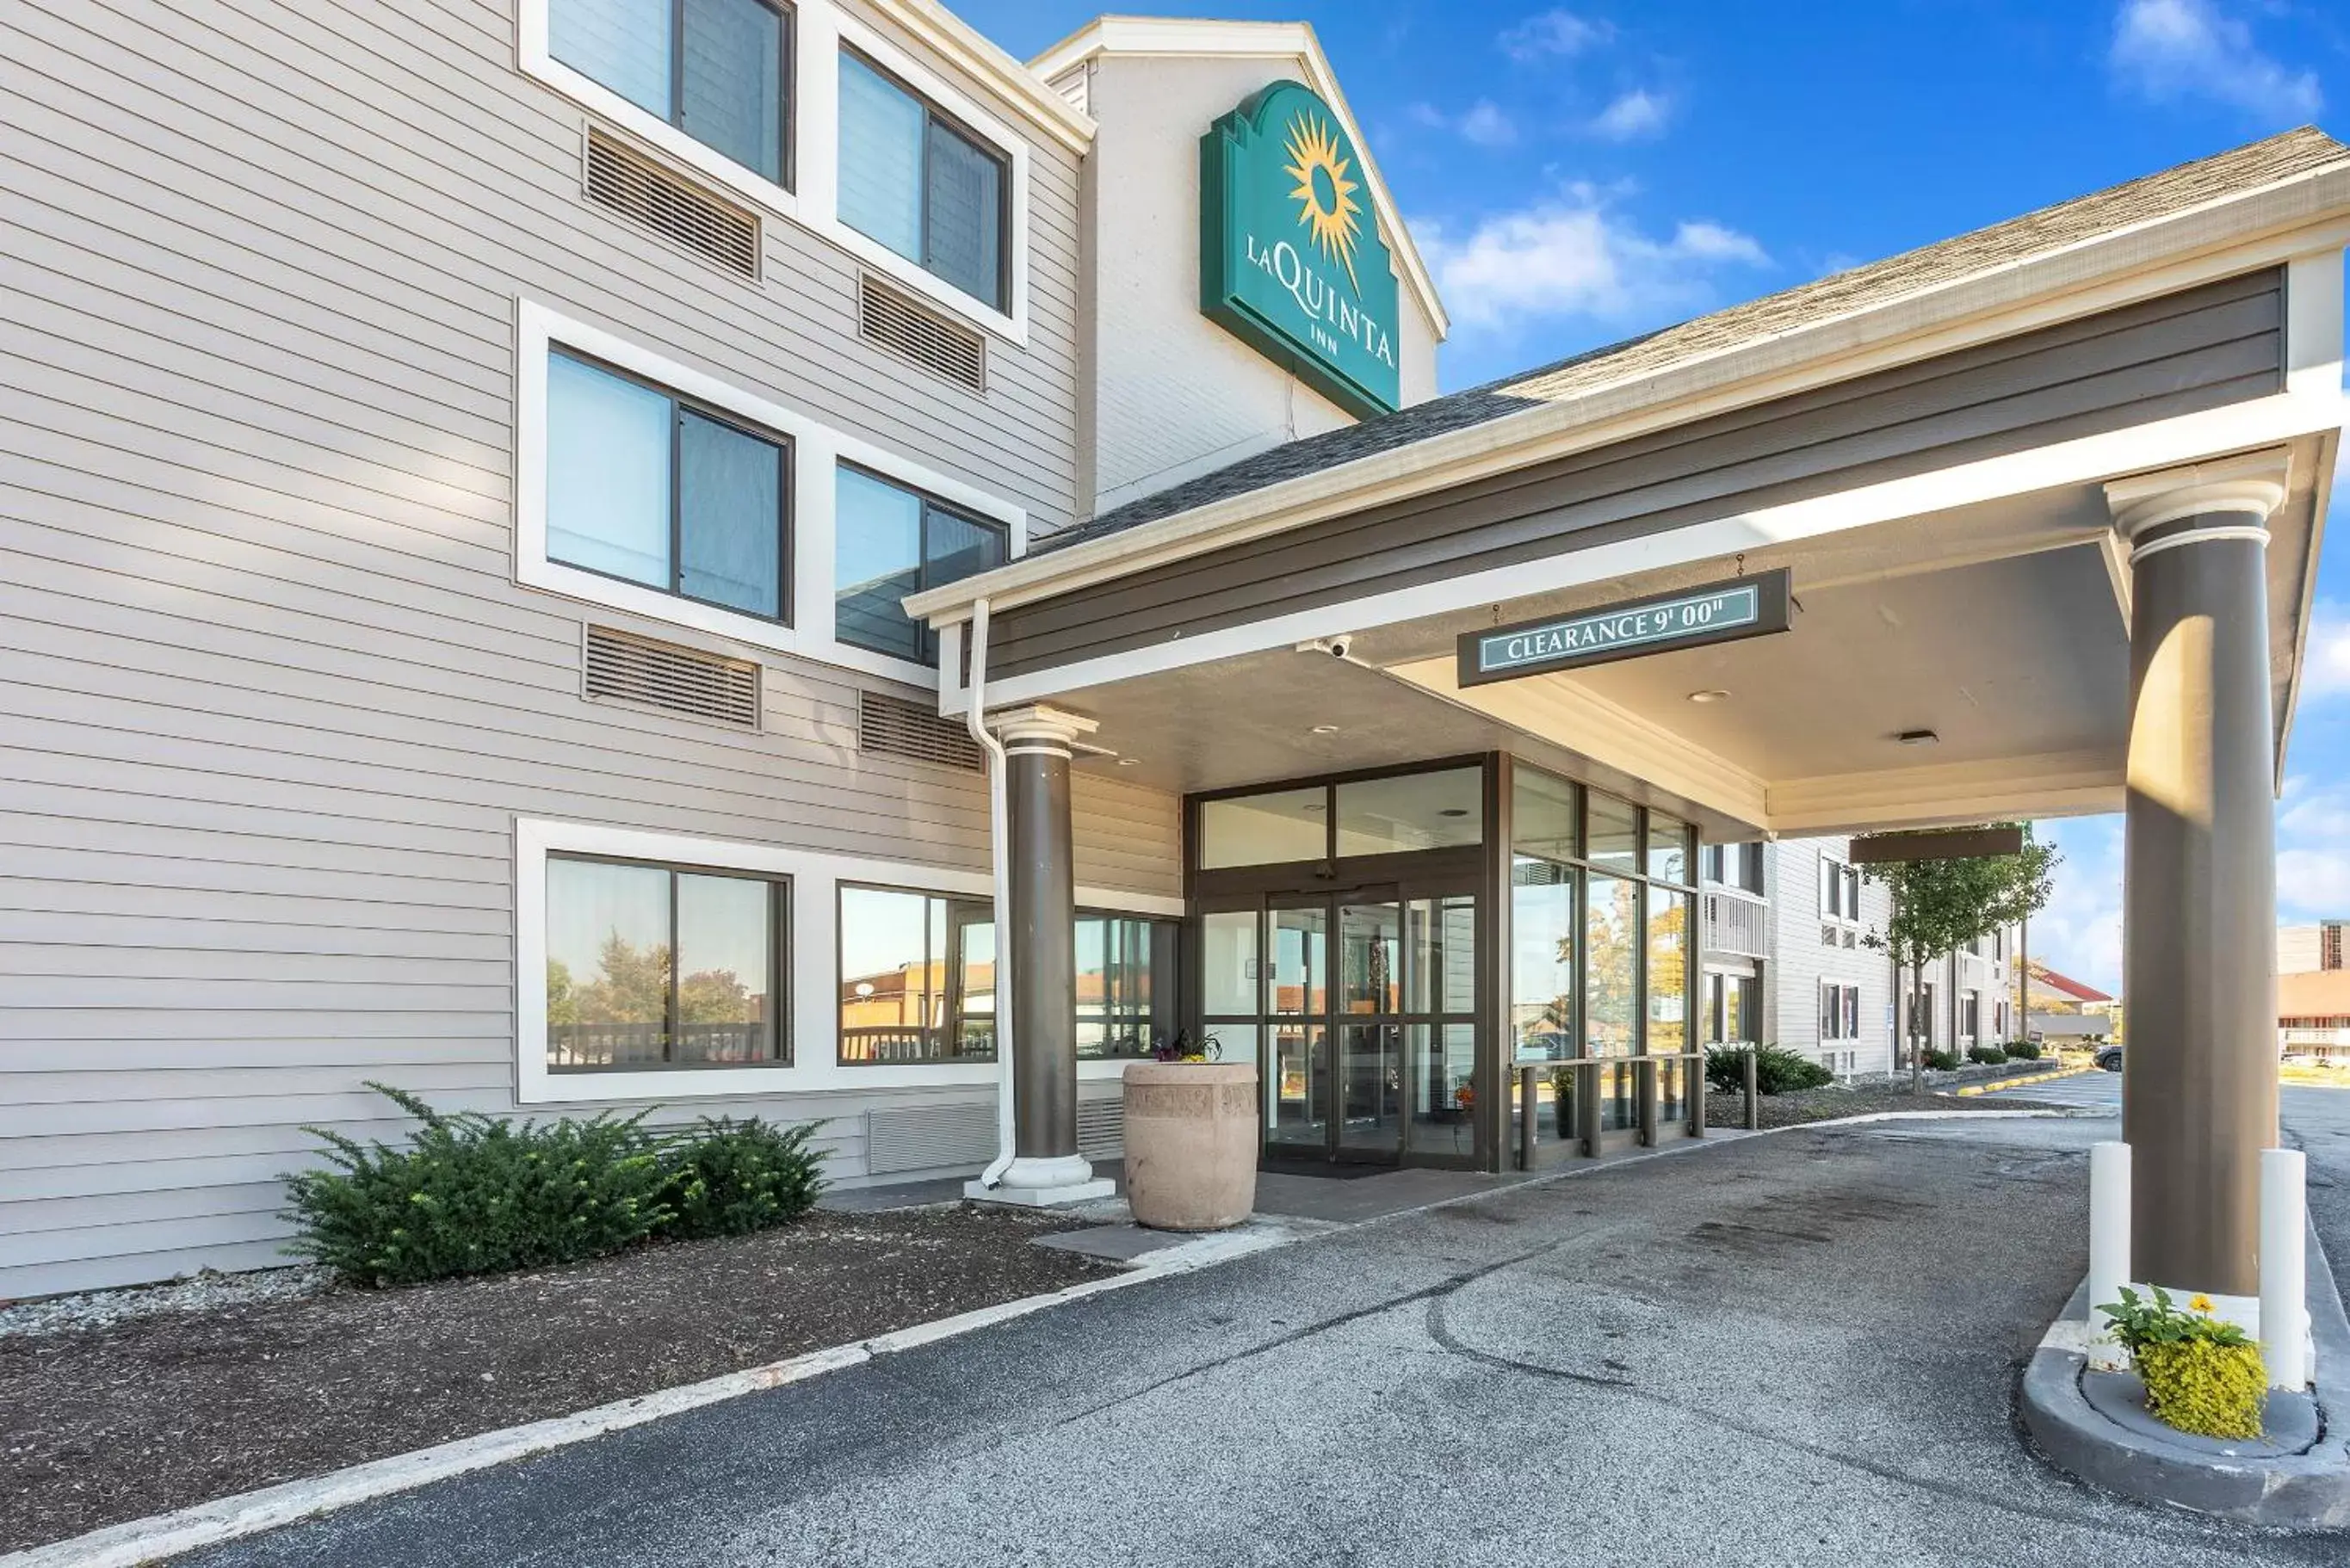 Property Building in La Quinta Inn by Wyndham Cleveland Independence